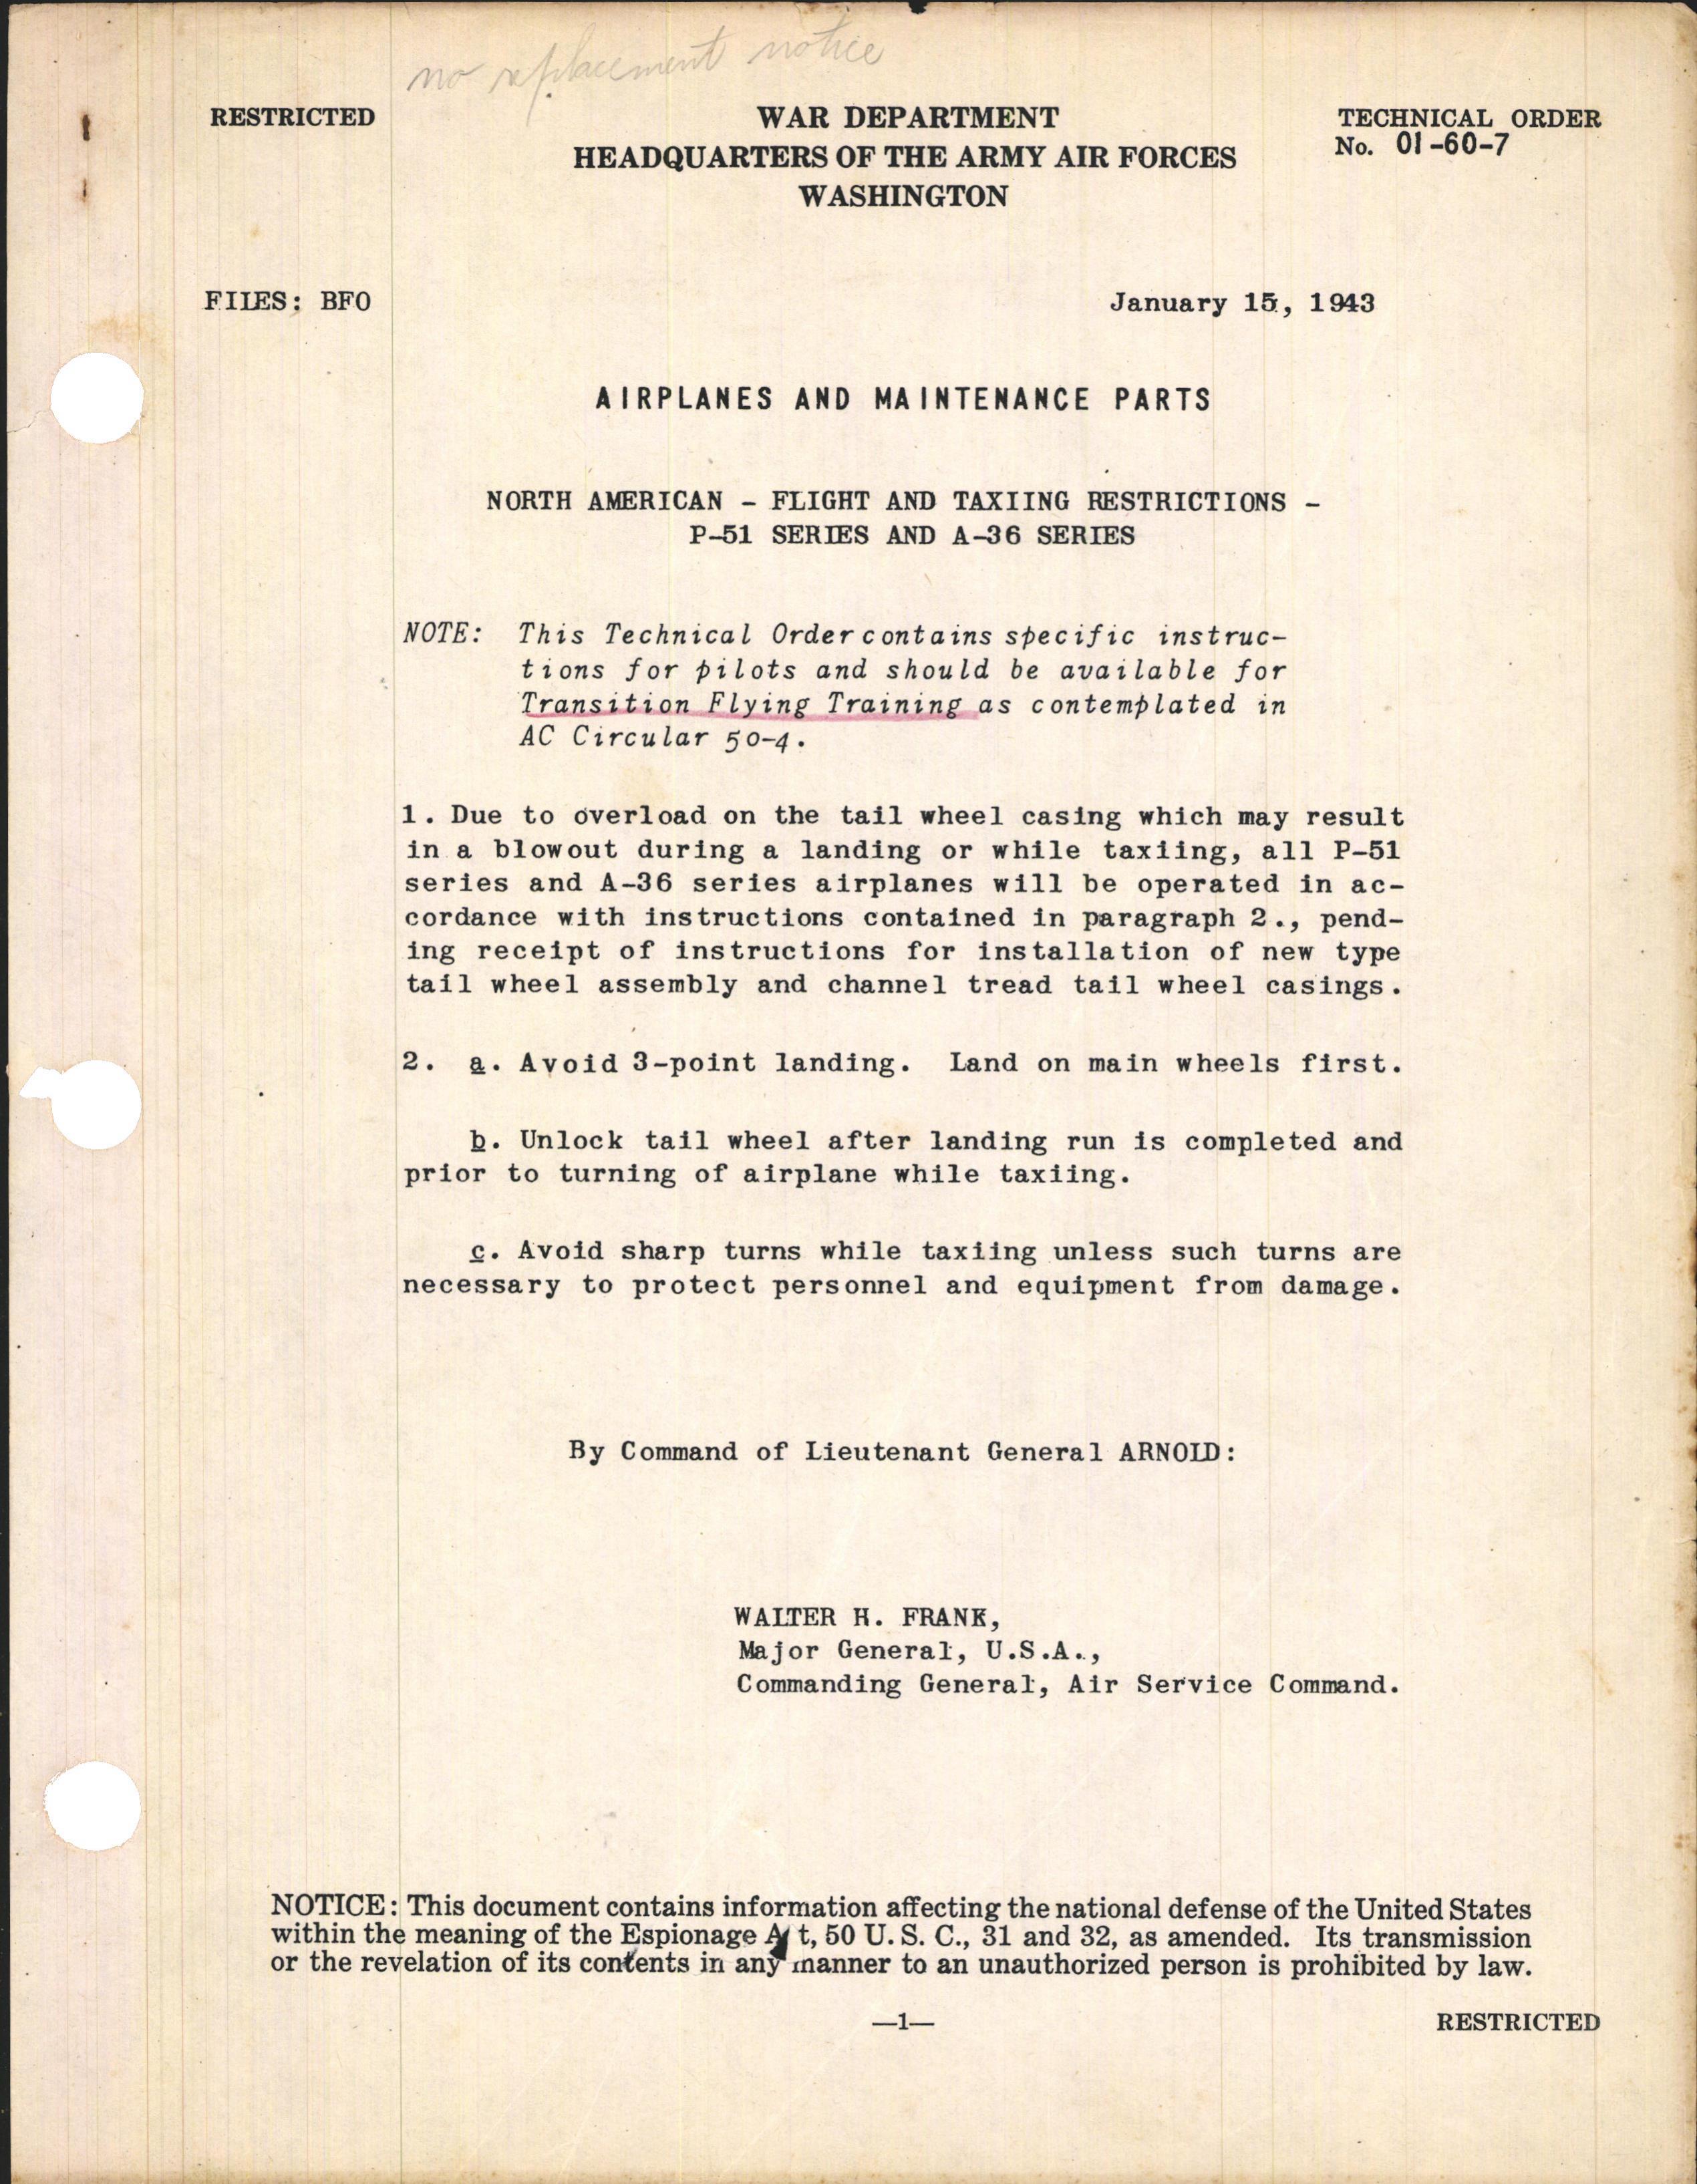 Sample page 1 from AirCorps Library document: Flight and Taxiing Restrictions for P-51 and A-36 Series